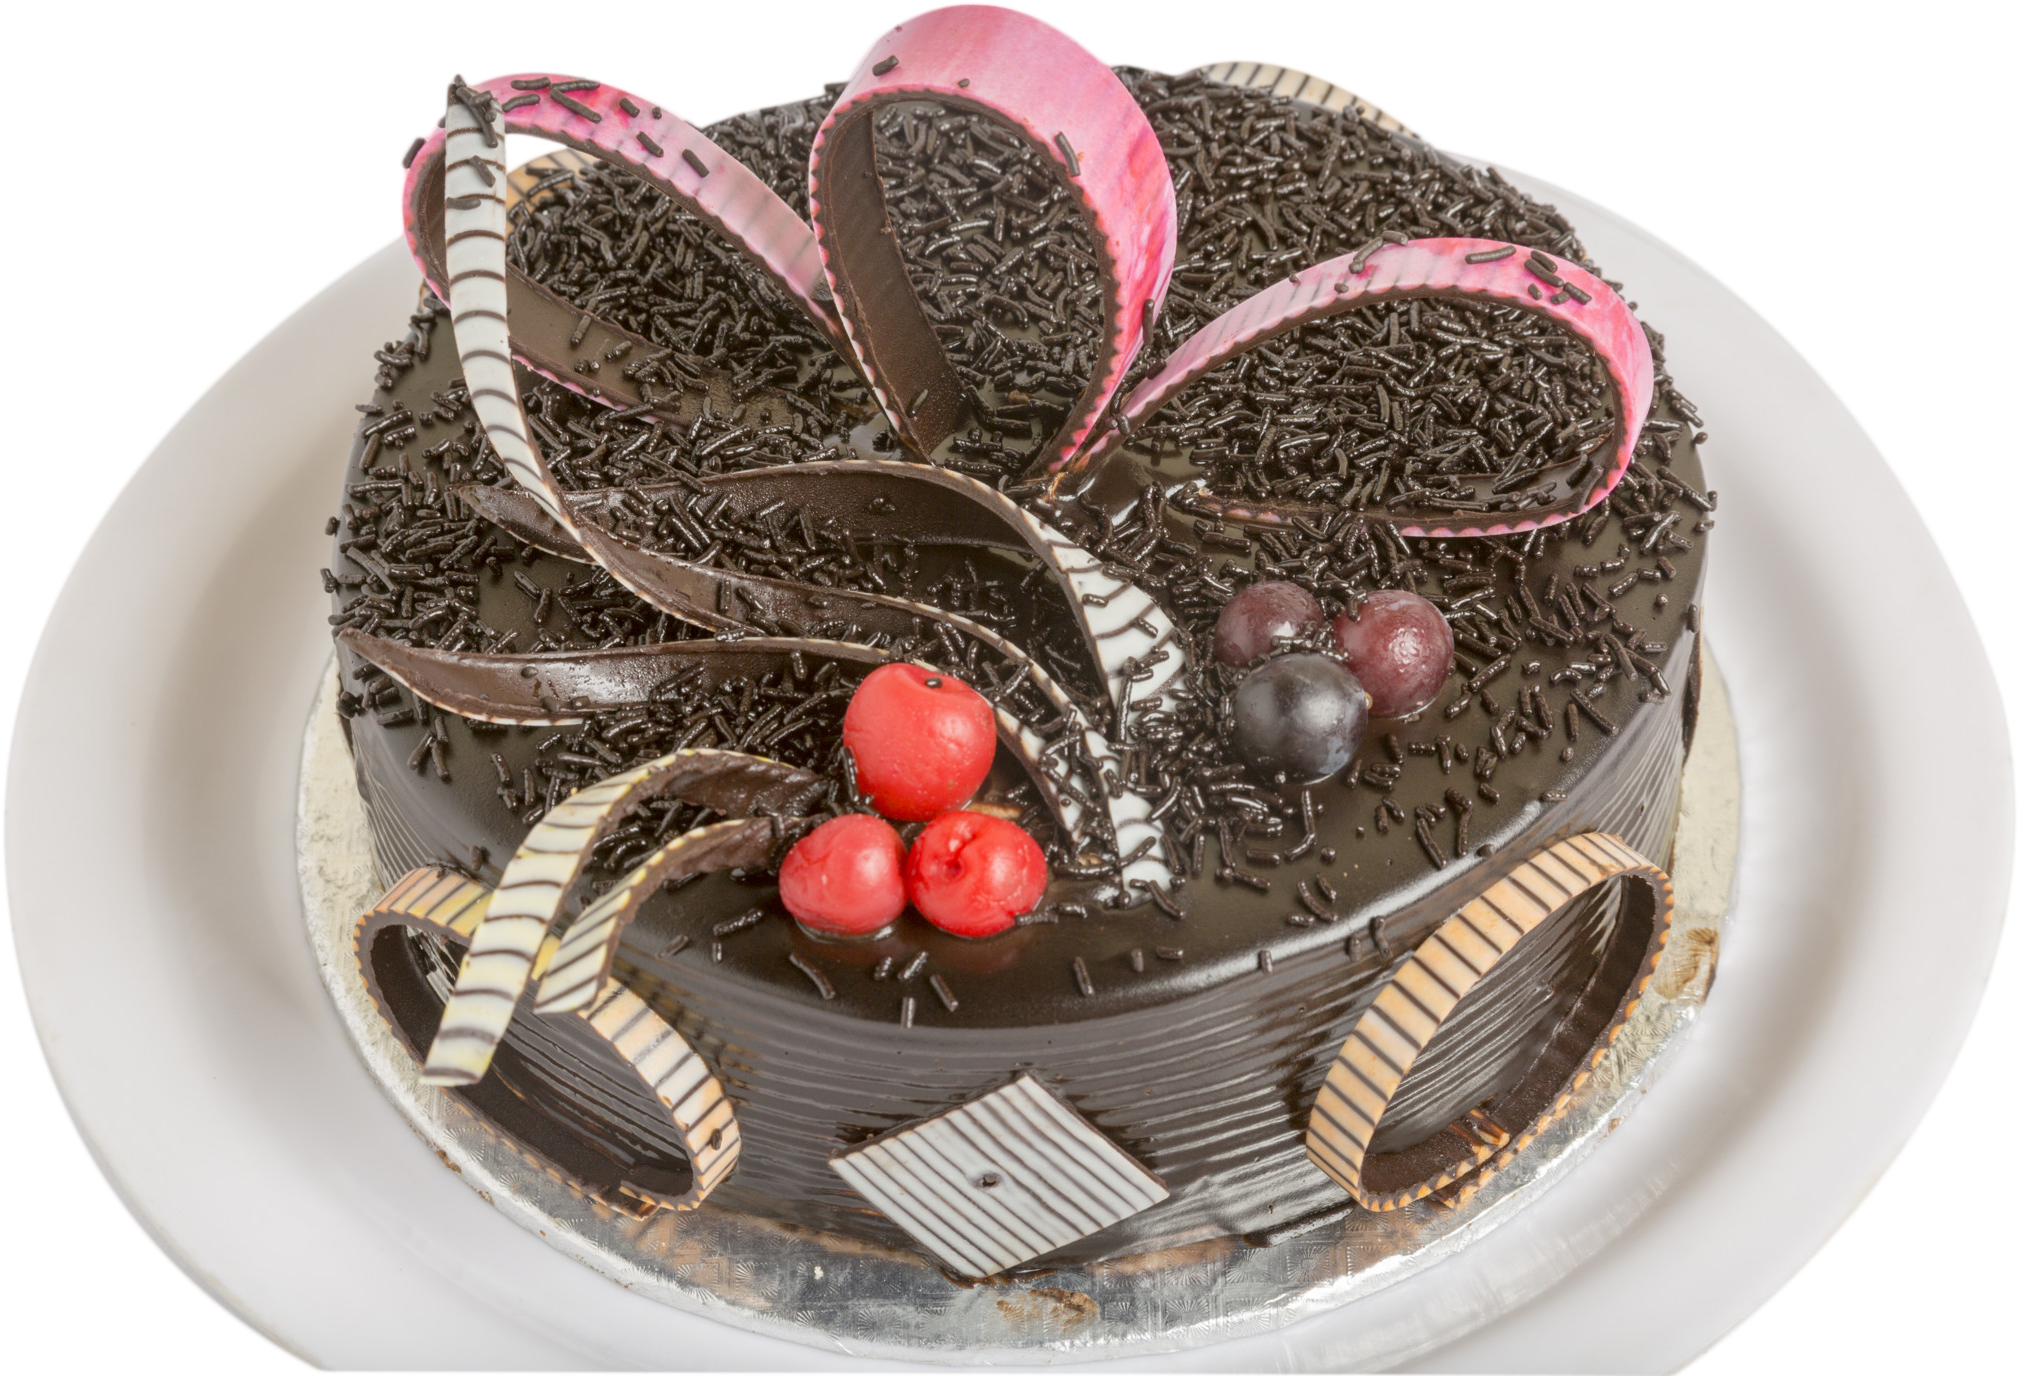 A Chocolate Cake With Ribbons And Berries